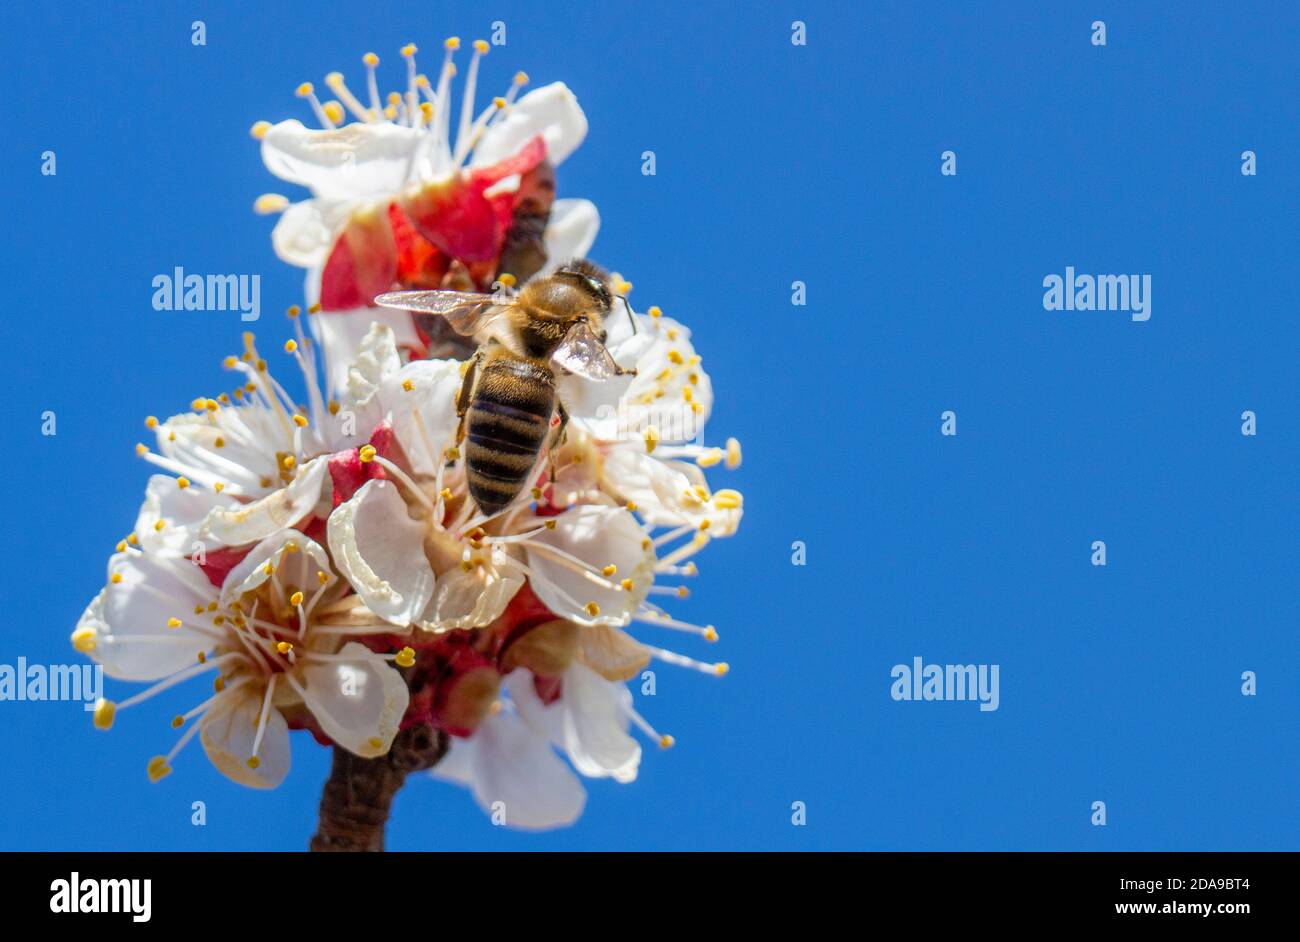 The bee pollinates the apricot flower, spreading monilia fungus by insects, including bees. The problem of infection with fungal diseases. Stock Photo